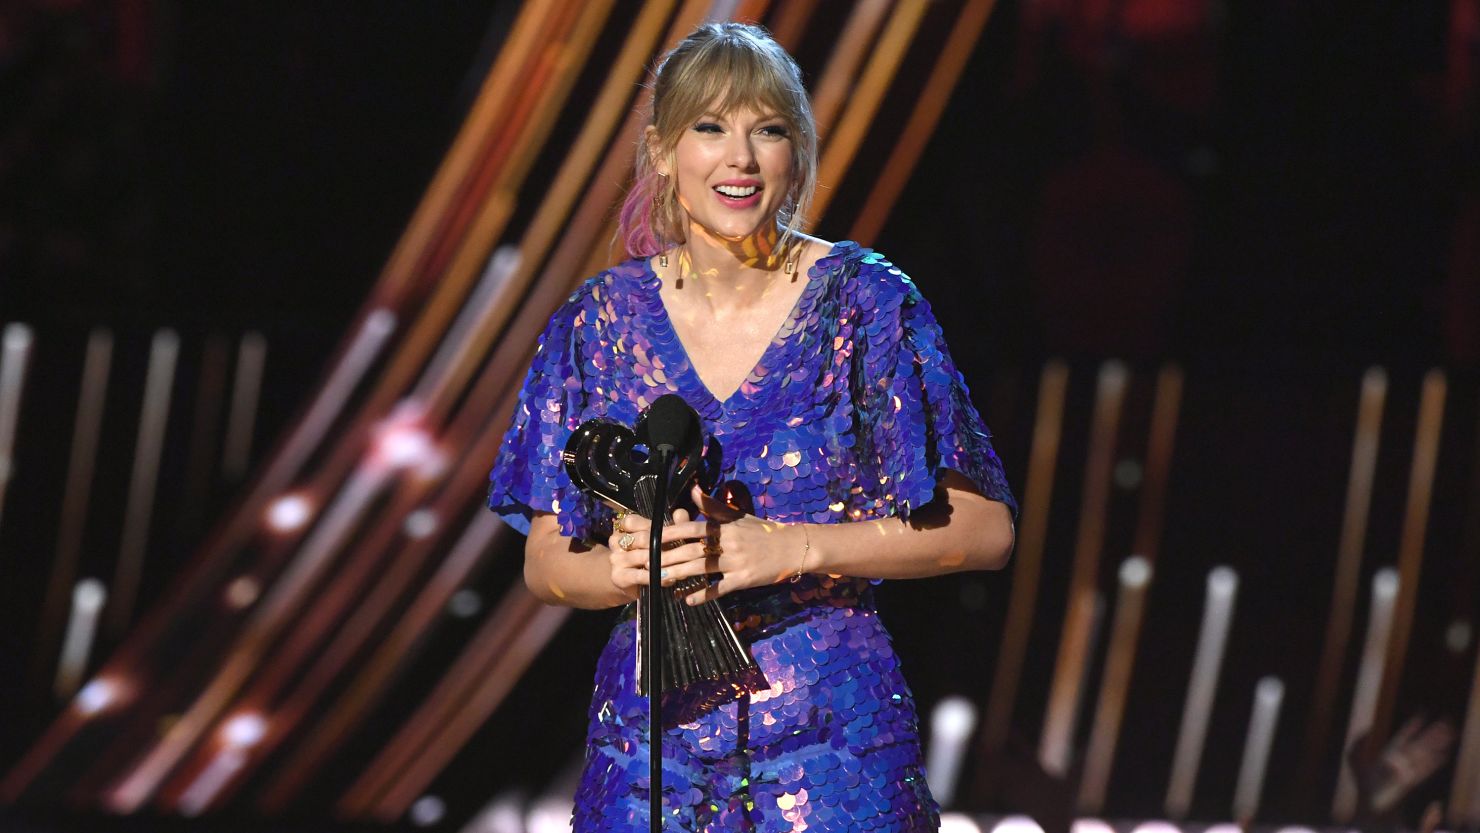 Taylor Swift accepts Tour of the Year honors Thursday at the iHeartRadio Music Awards in Los Angeles.